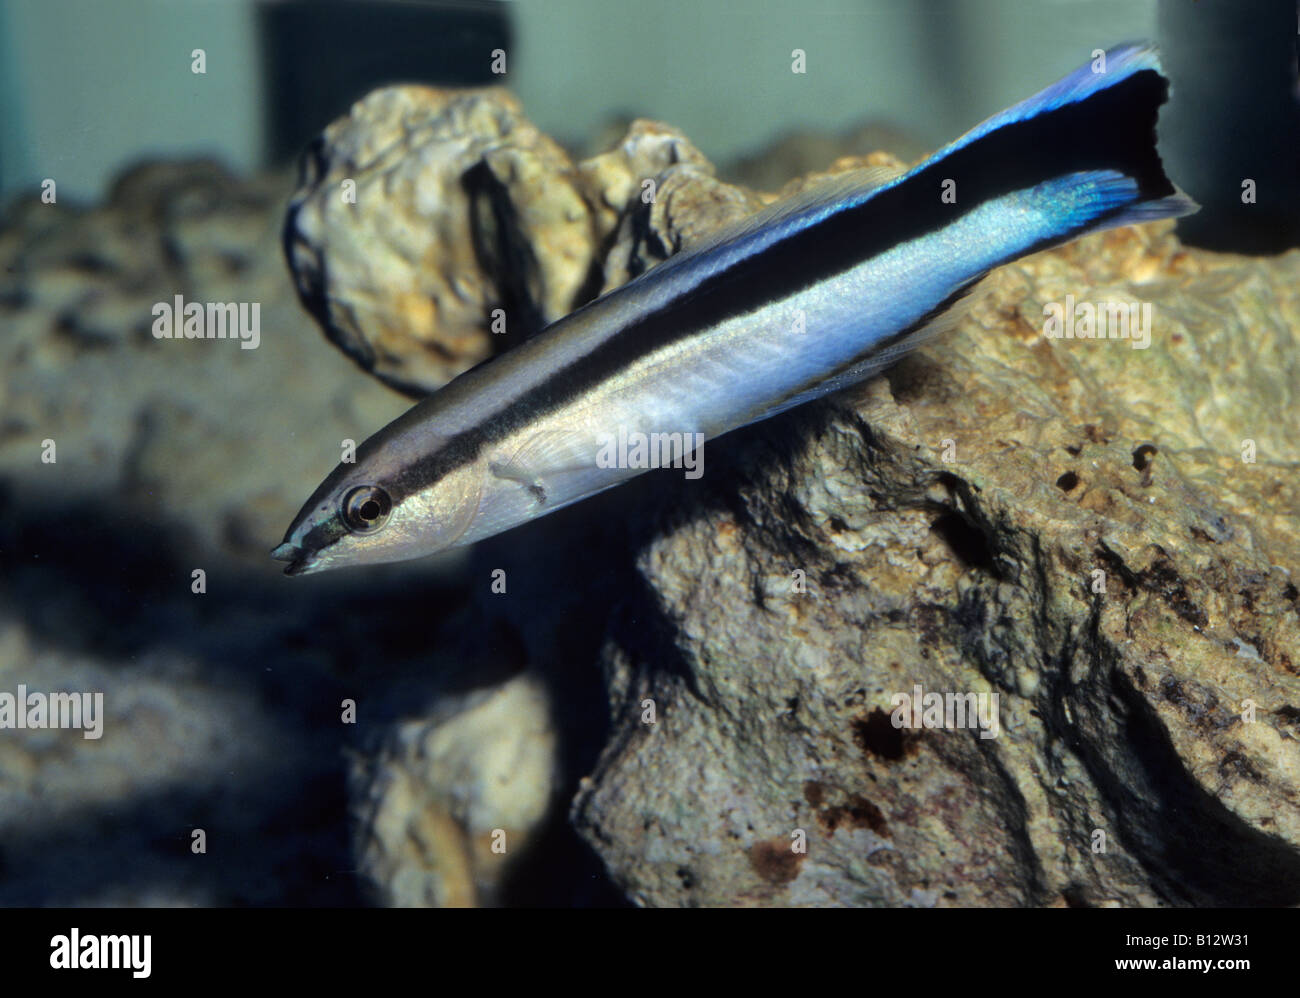 Labroides dimidiatus, Labridae, cleaning wrasse Stock Photo